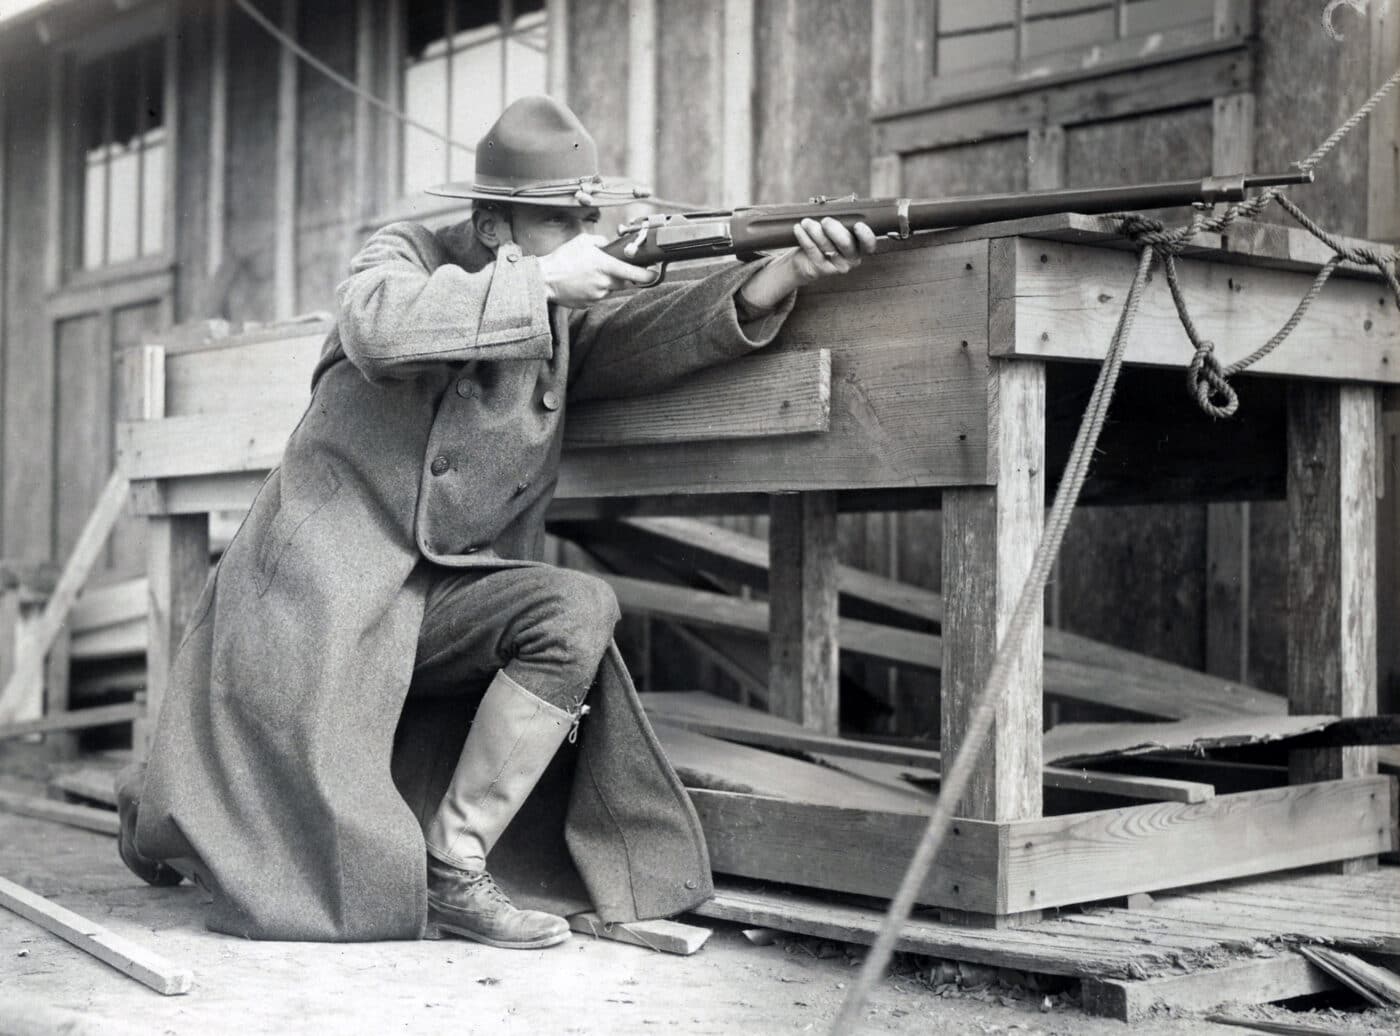 Soldier posing with Krag rifle at Camp Dix in New Jersey